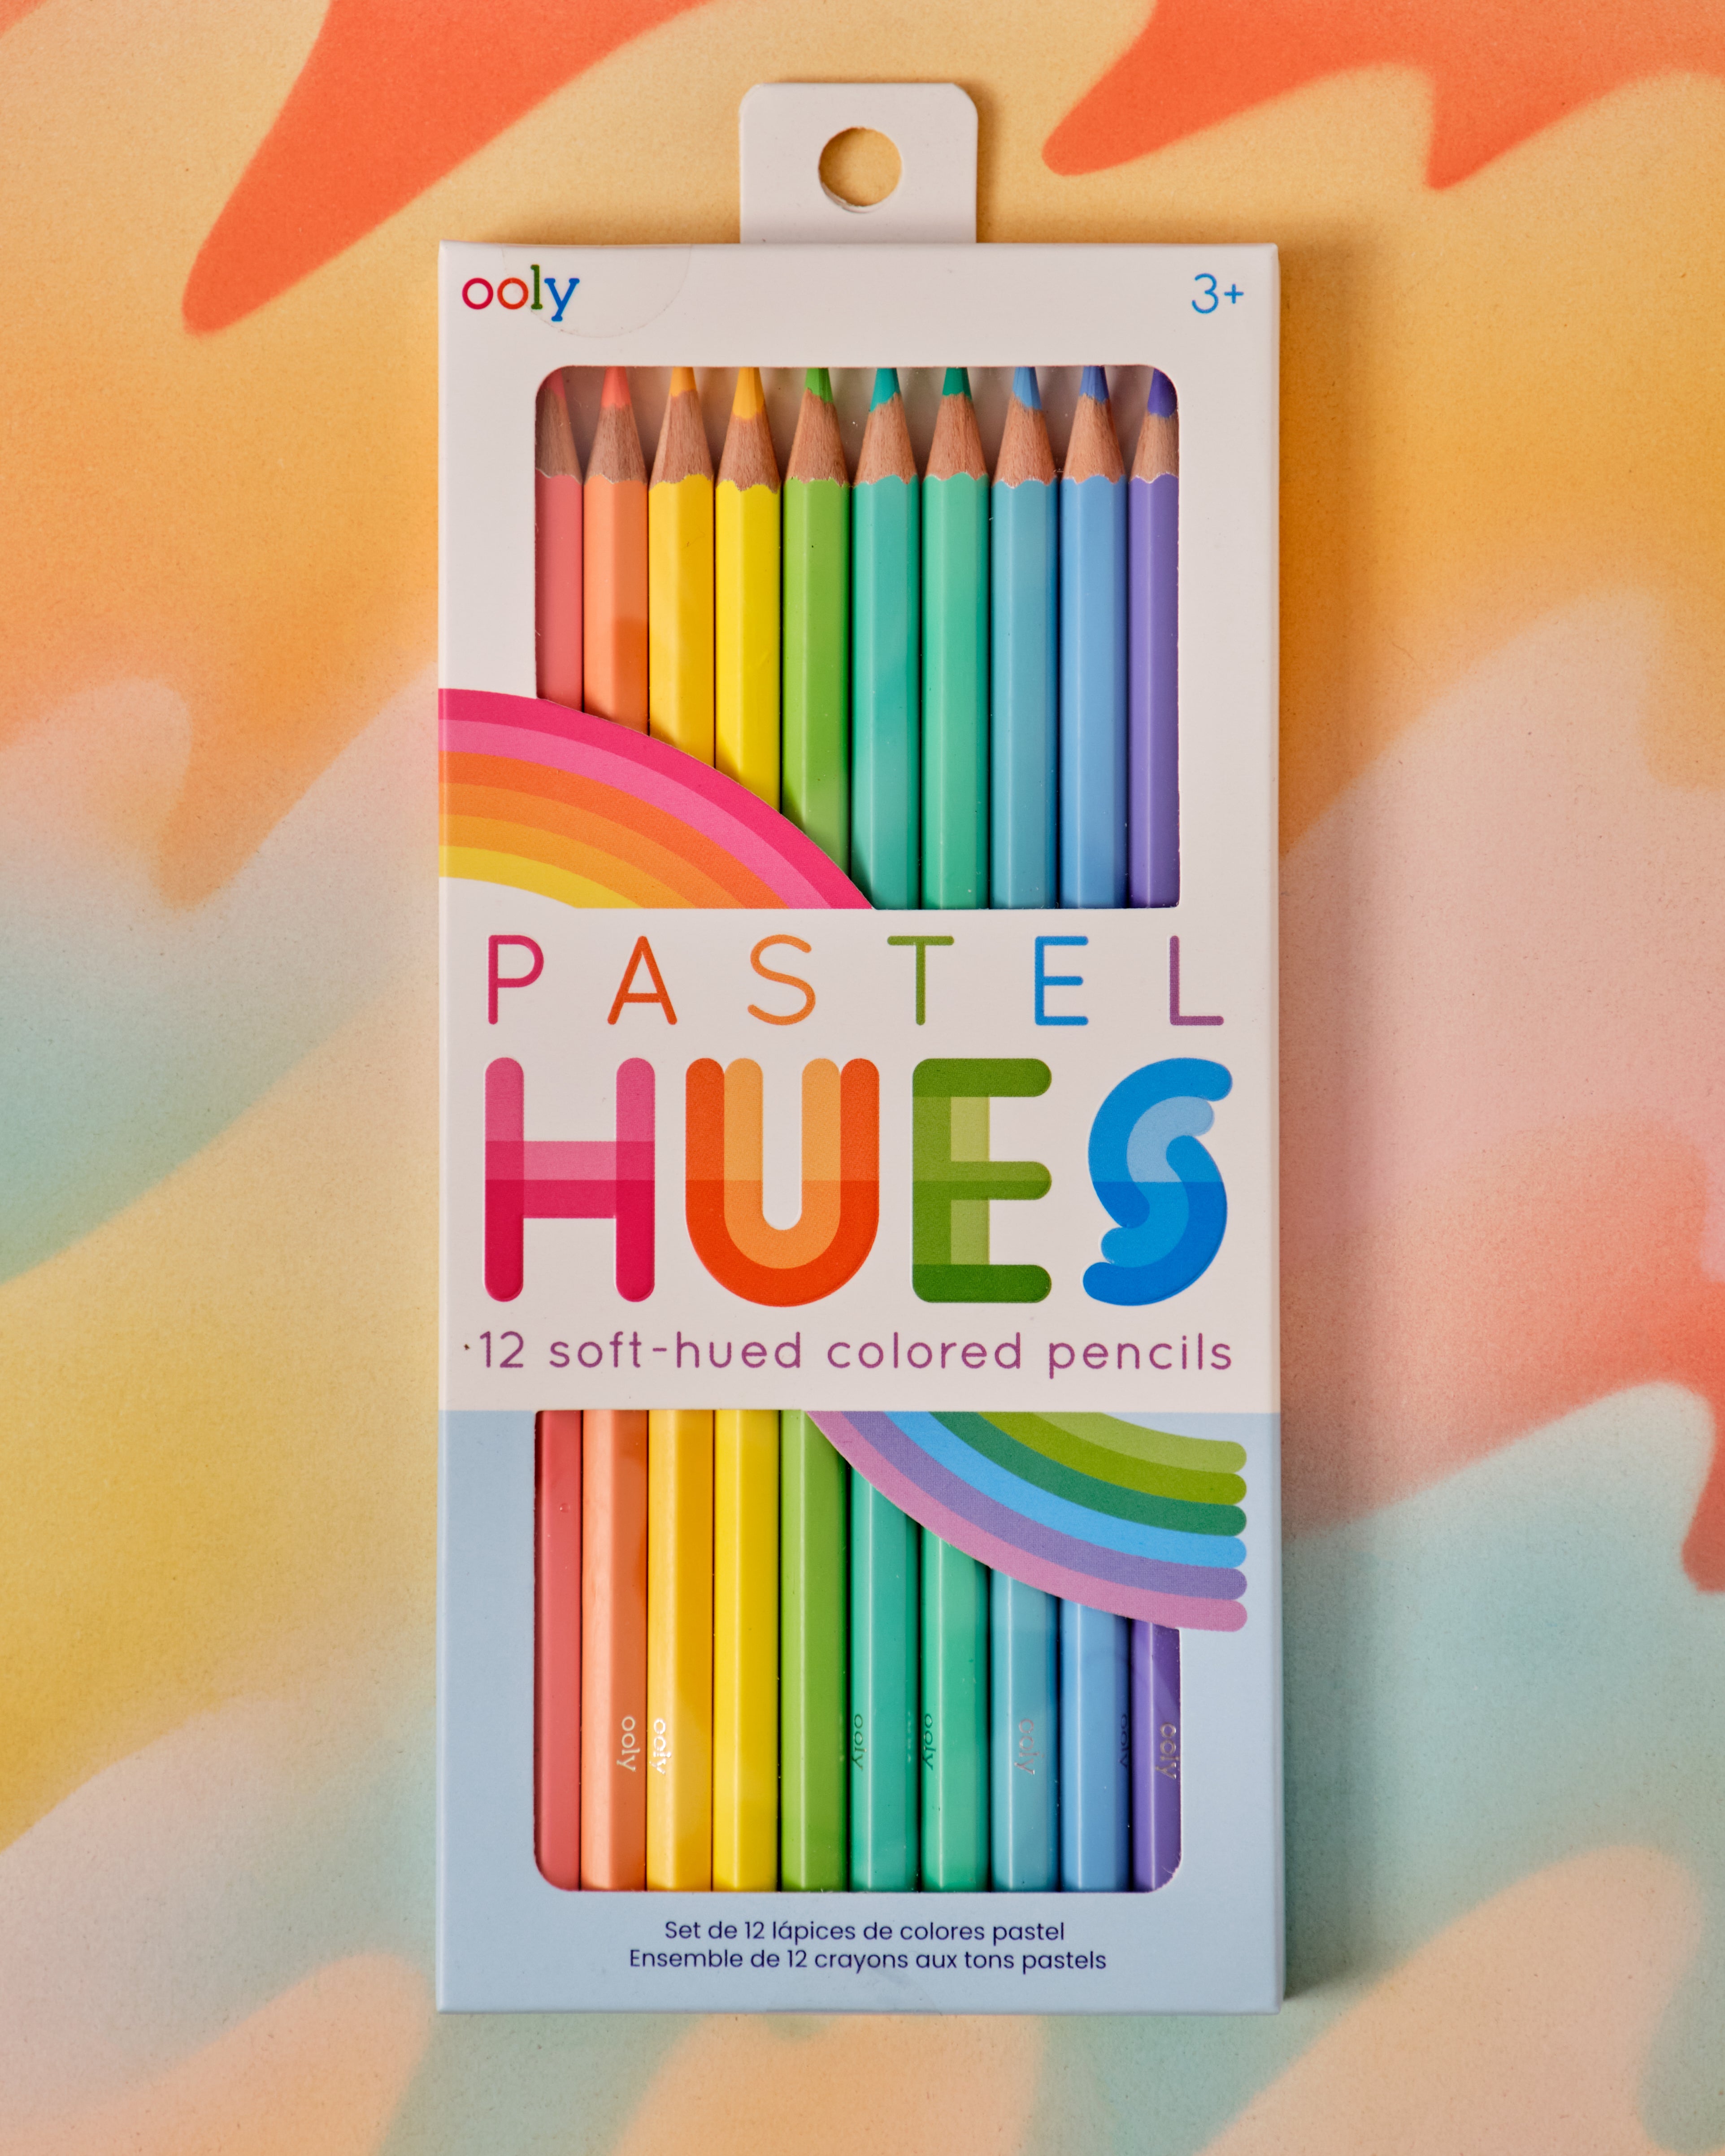 Ooly Pastel Hues Colored Pencil Set of 12 – Crush